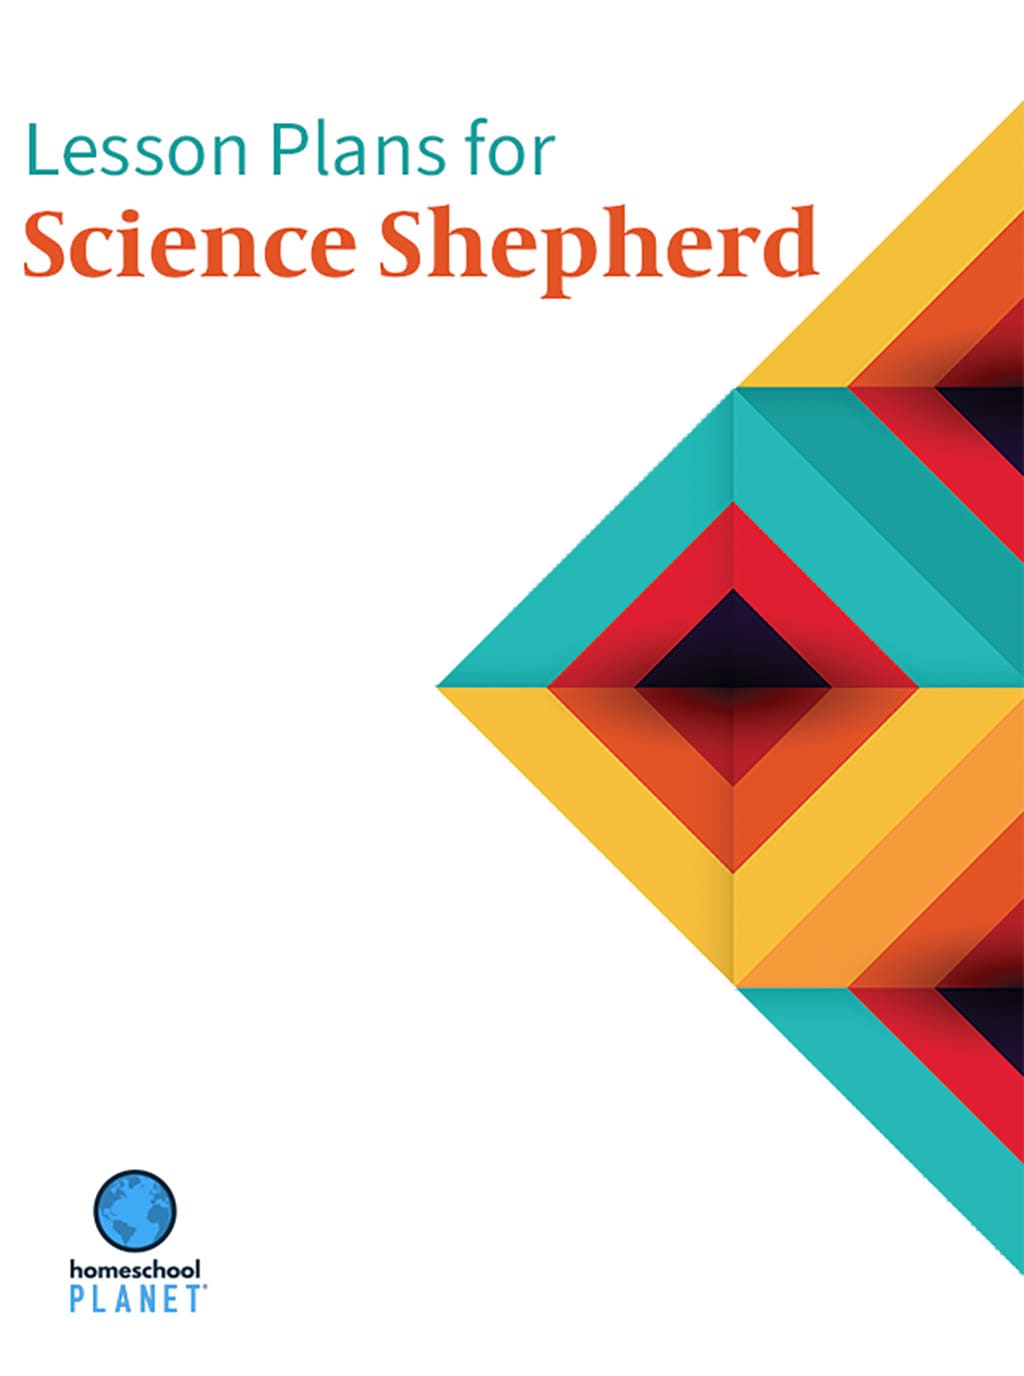 Cover image for the homeschool science schedule from Science Shepherd